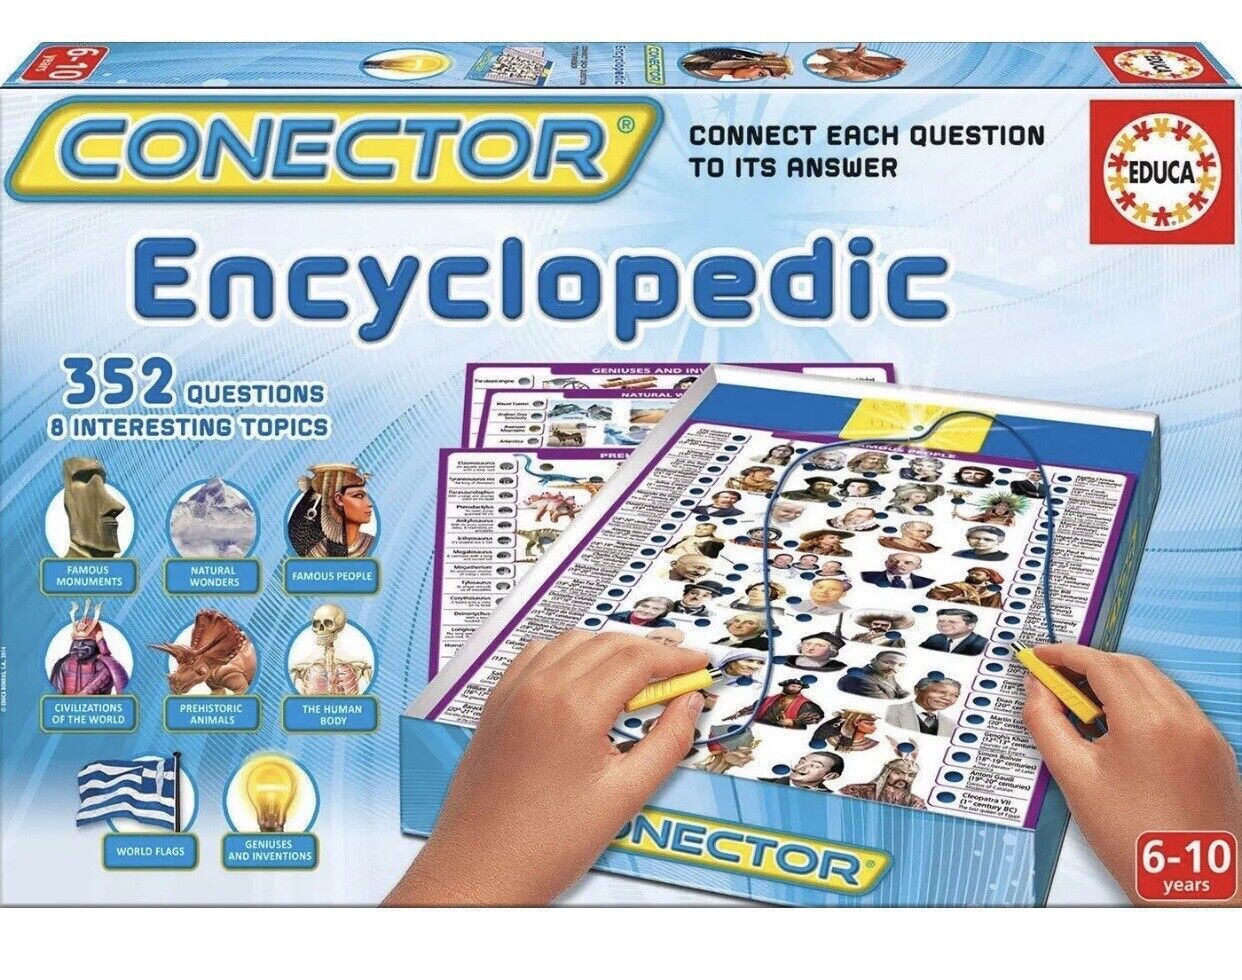 Learning game Educa Conector Encyclopedic Game Educational Game 6-10 Home school - $24.30